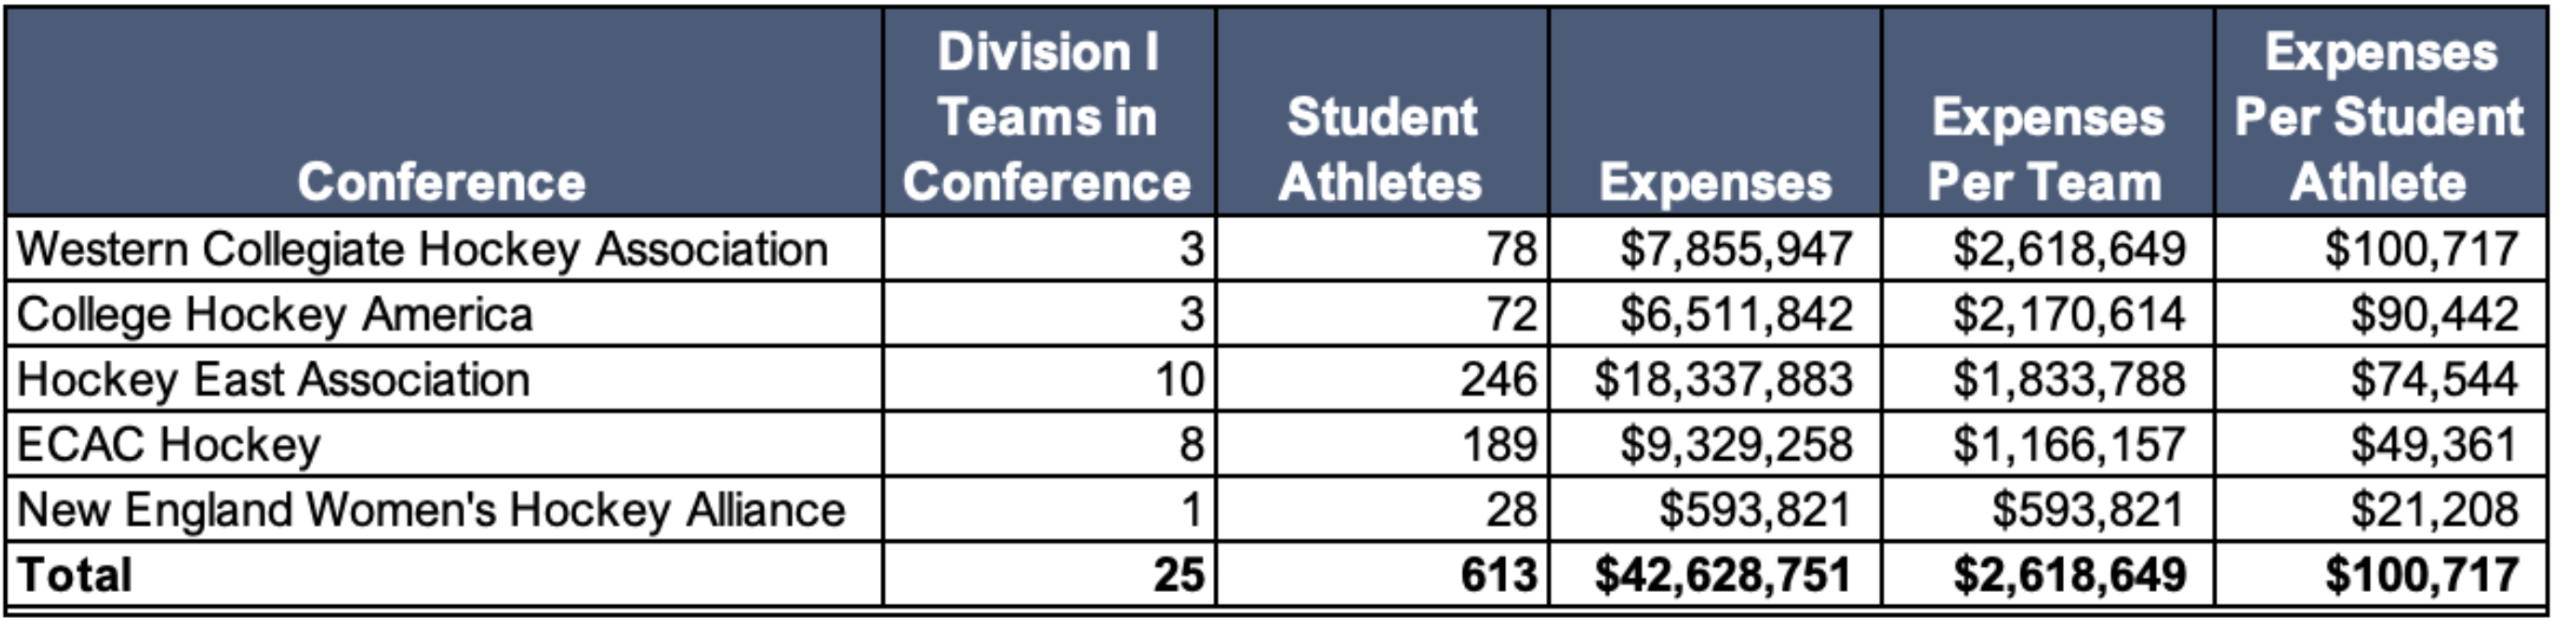 Table comparing expenses of collegiate women's ice hockey